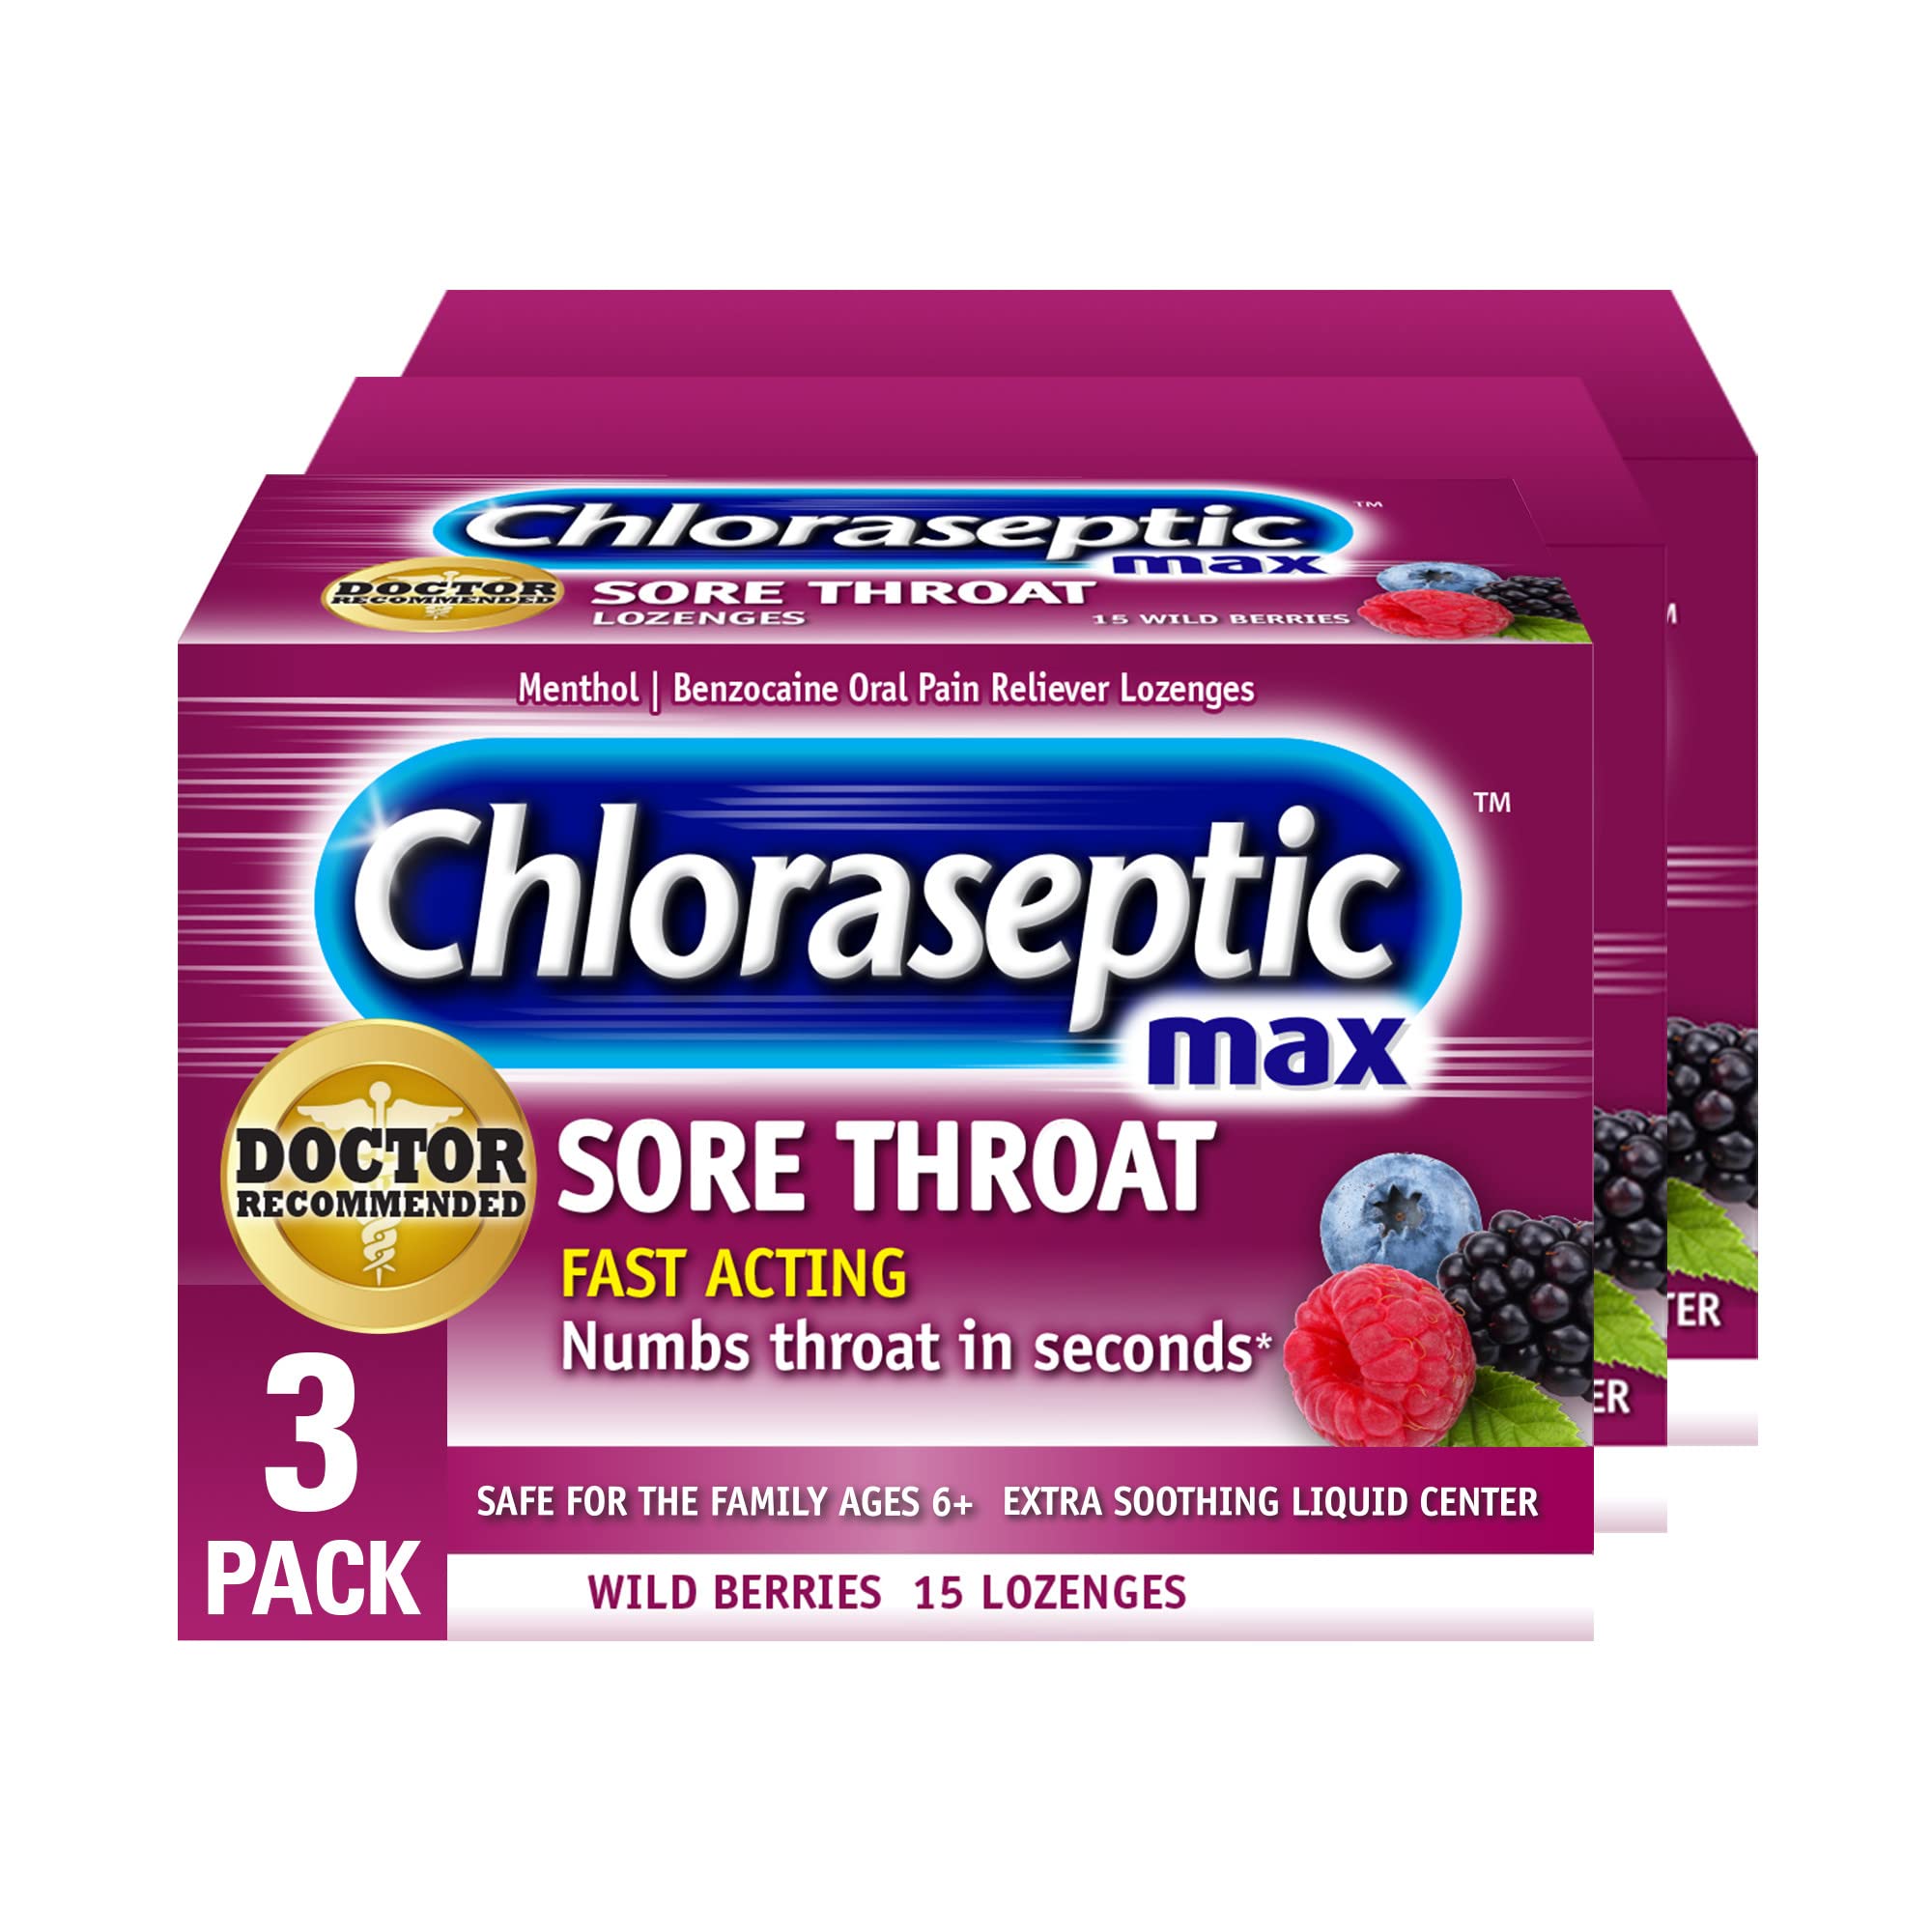 Chloraseptic Max Strength Sore Throat Lozenges, Wild Berries, 15 Count, 3 Pack